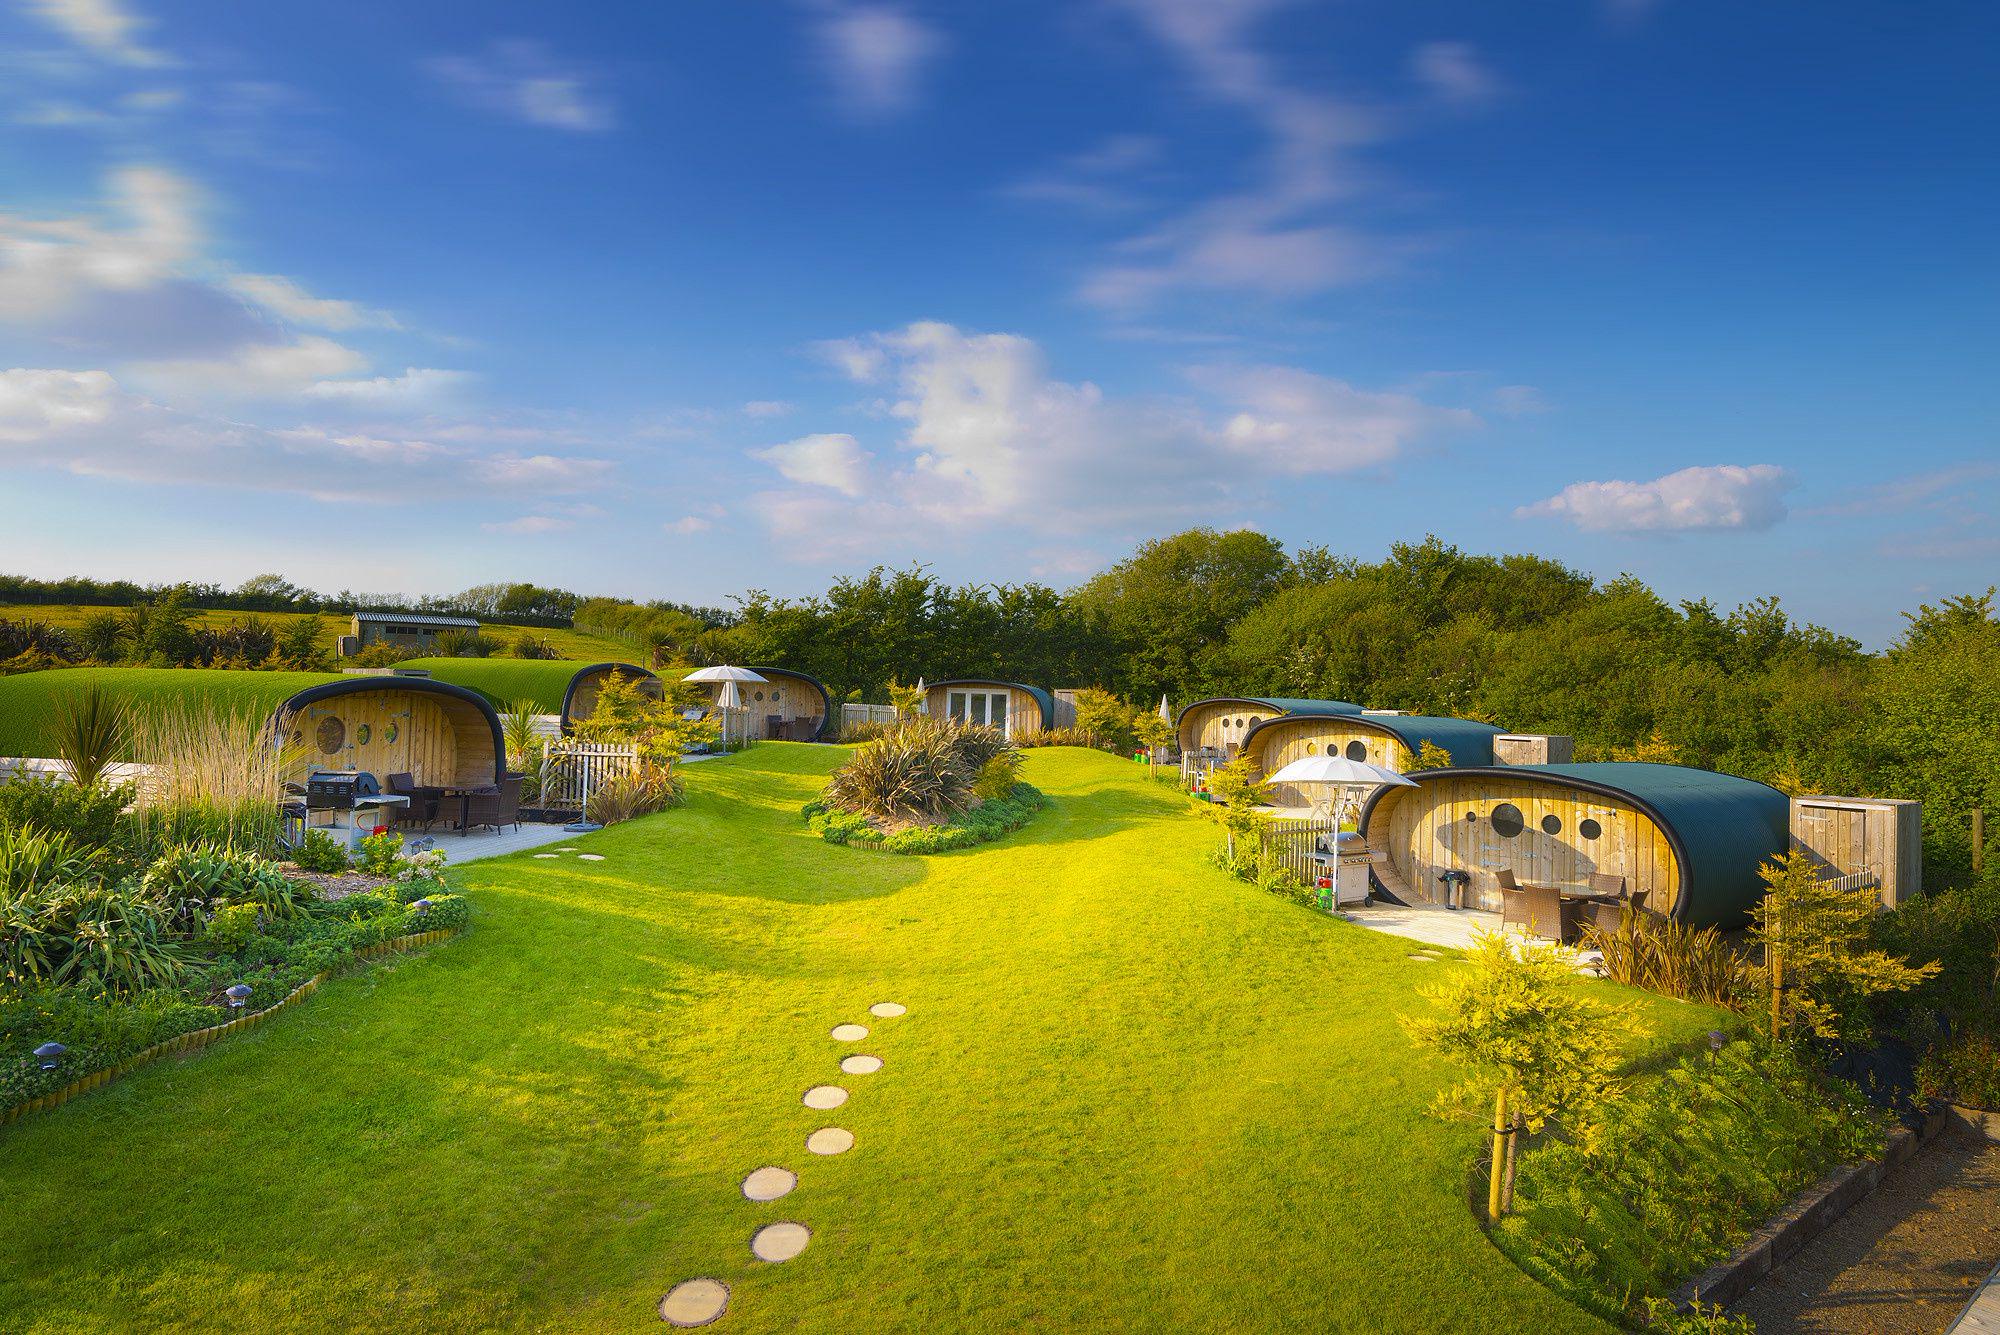 All glamping sites available to book with Glampingly | Full list